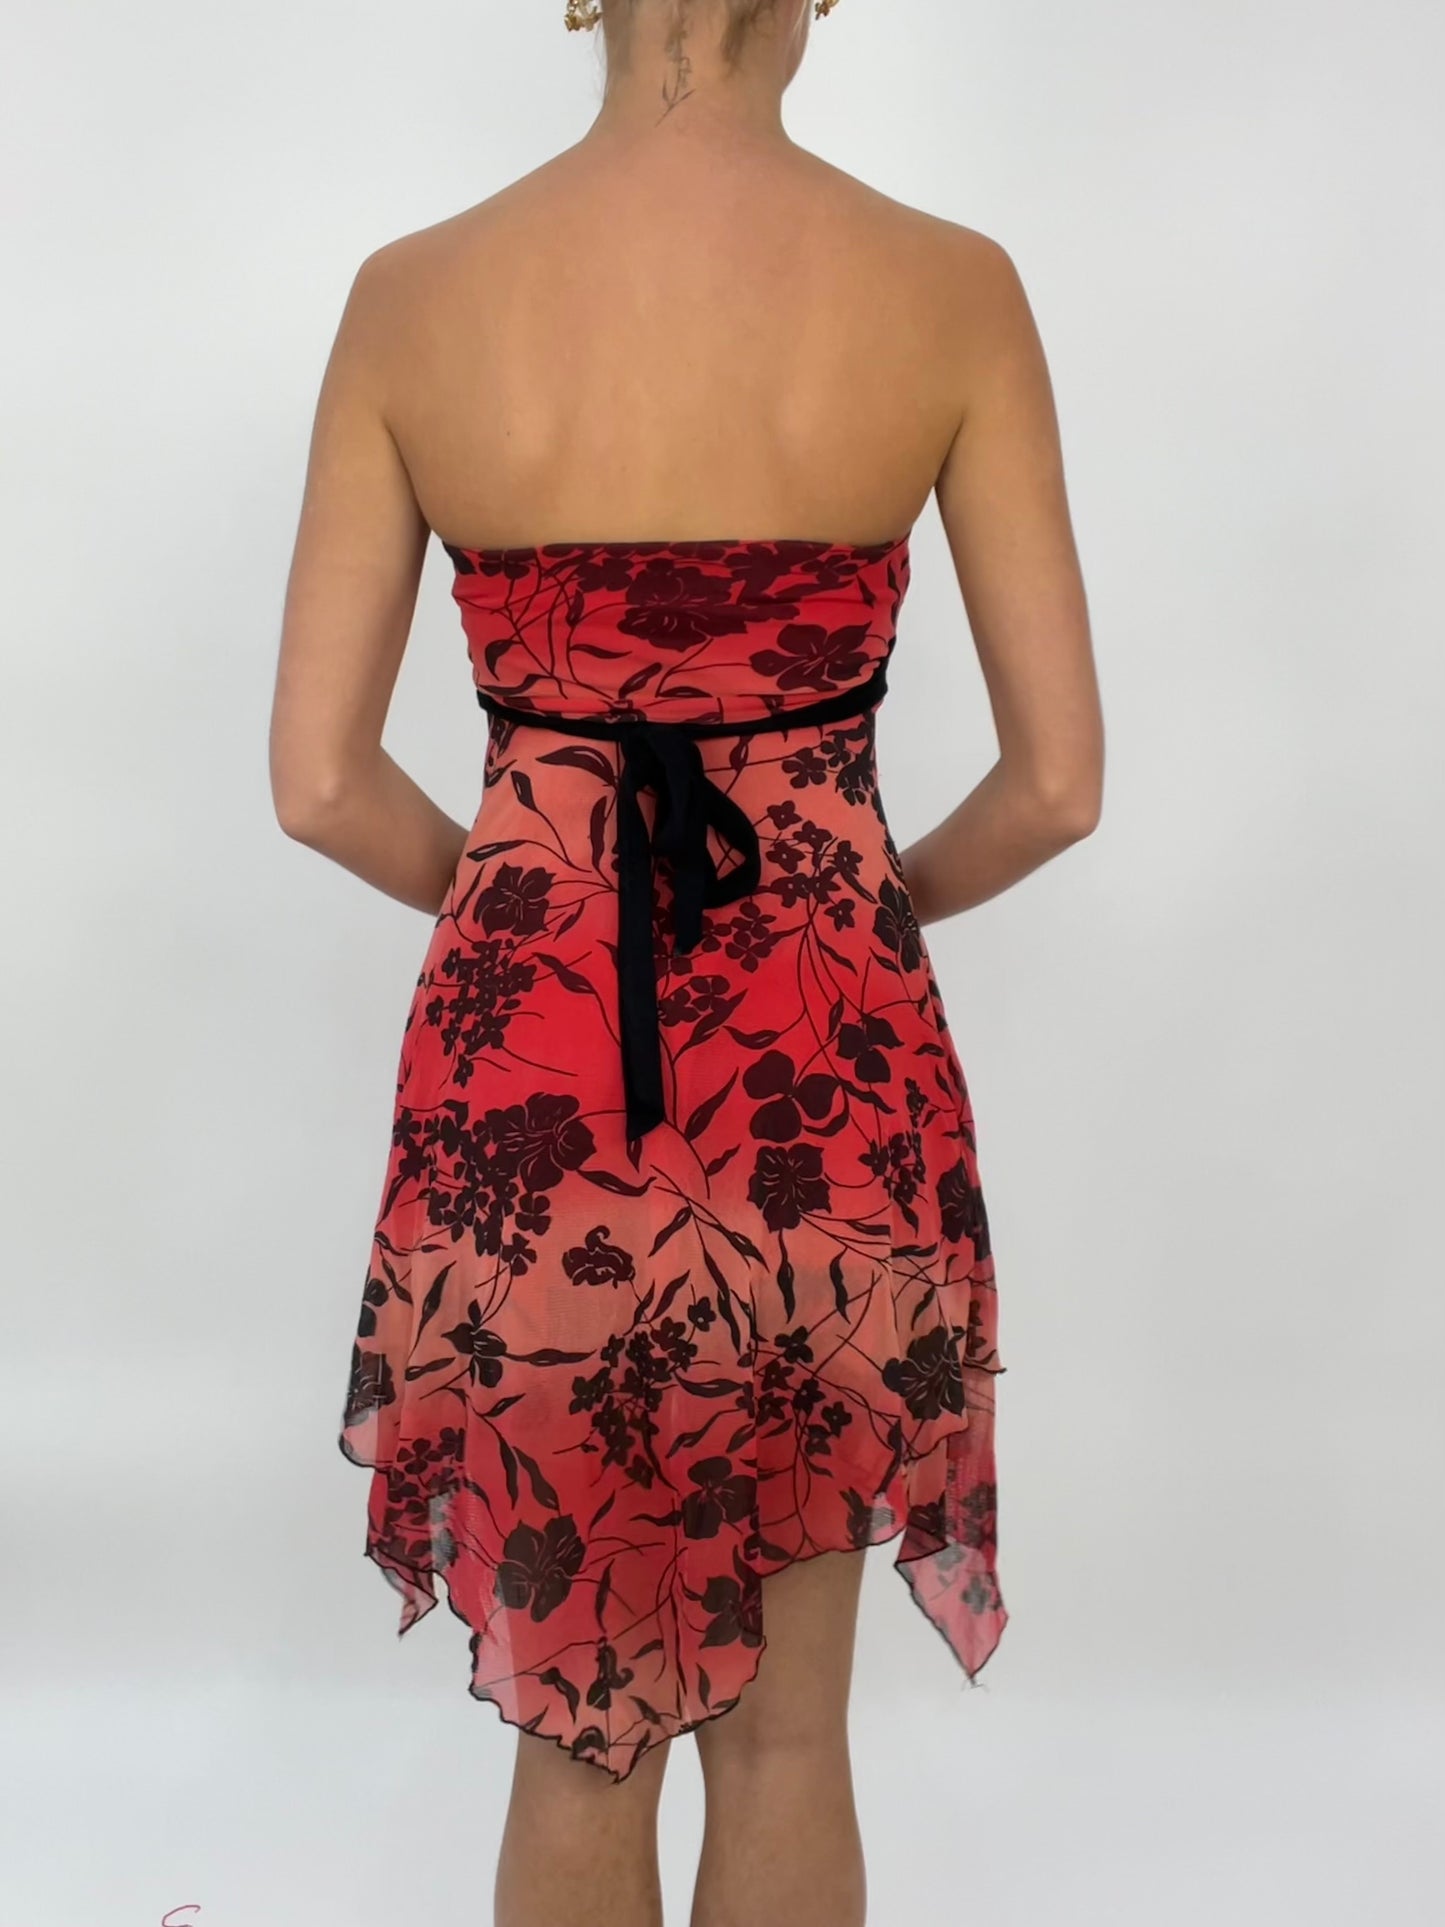 💻 COCONUT GIRL DROP | small red jane norman bandeau style dress with black floral print